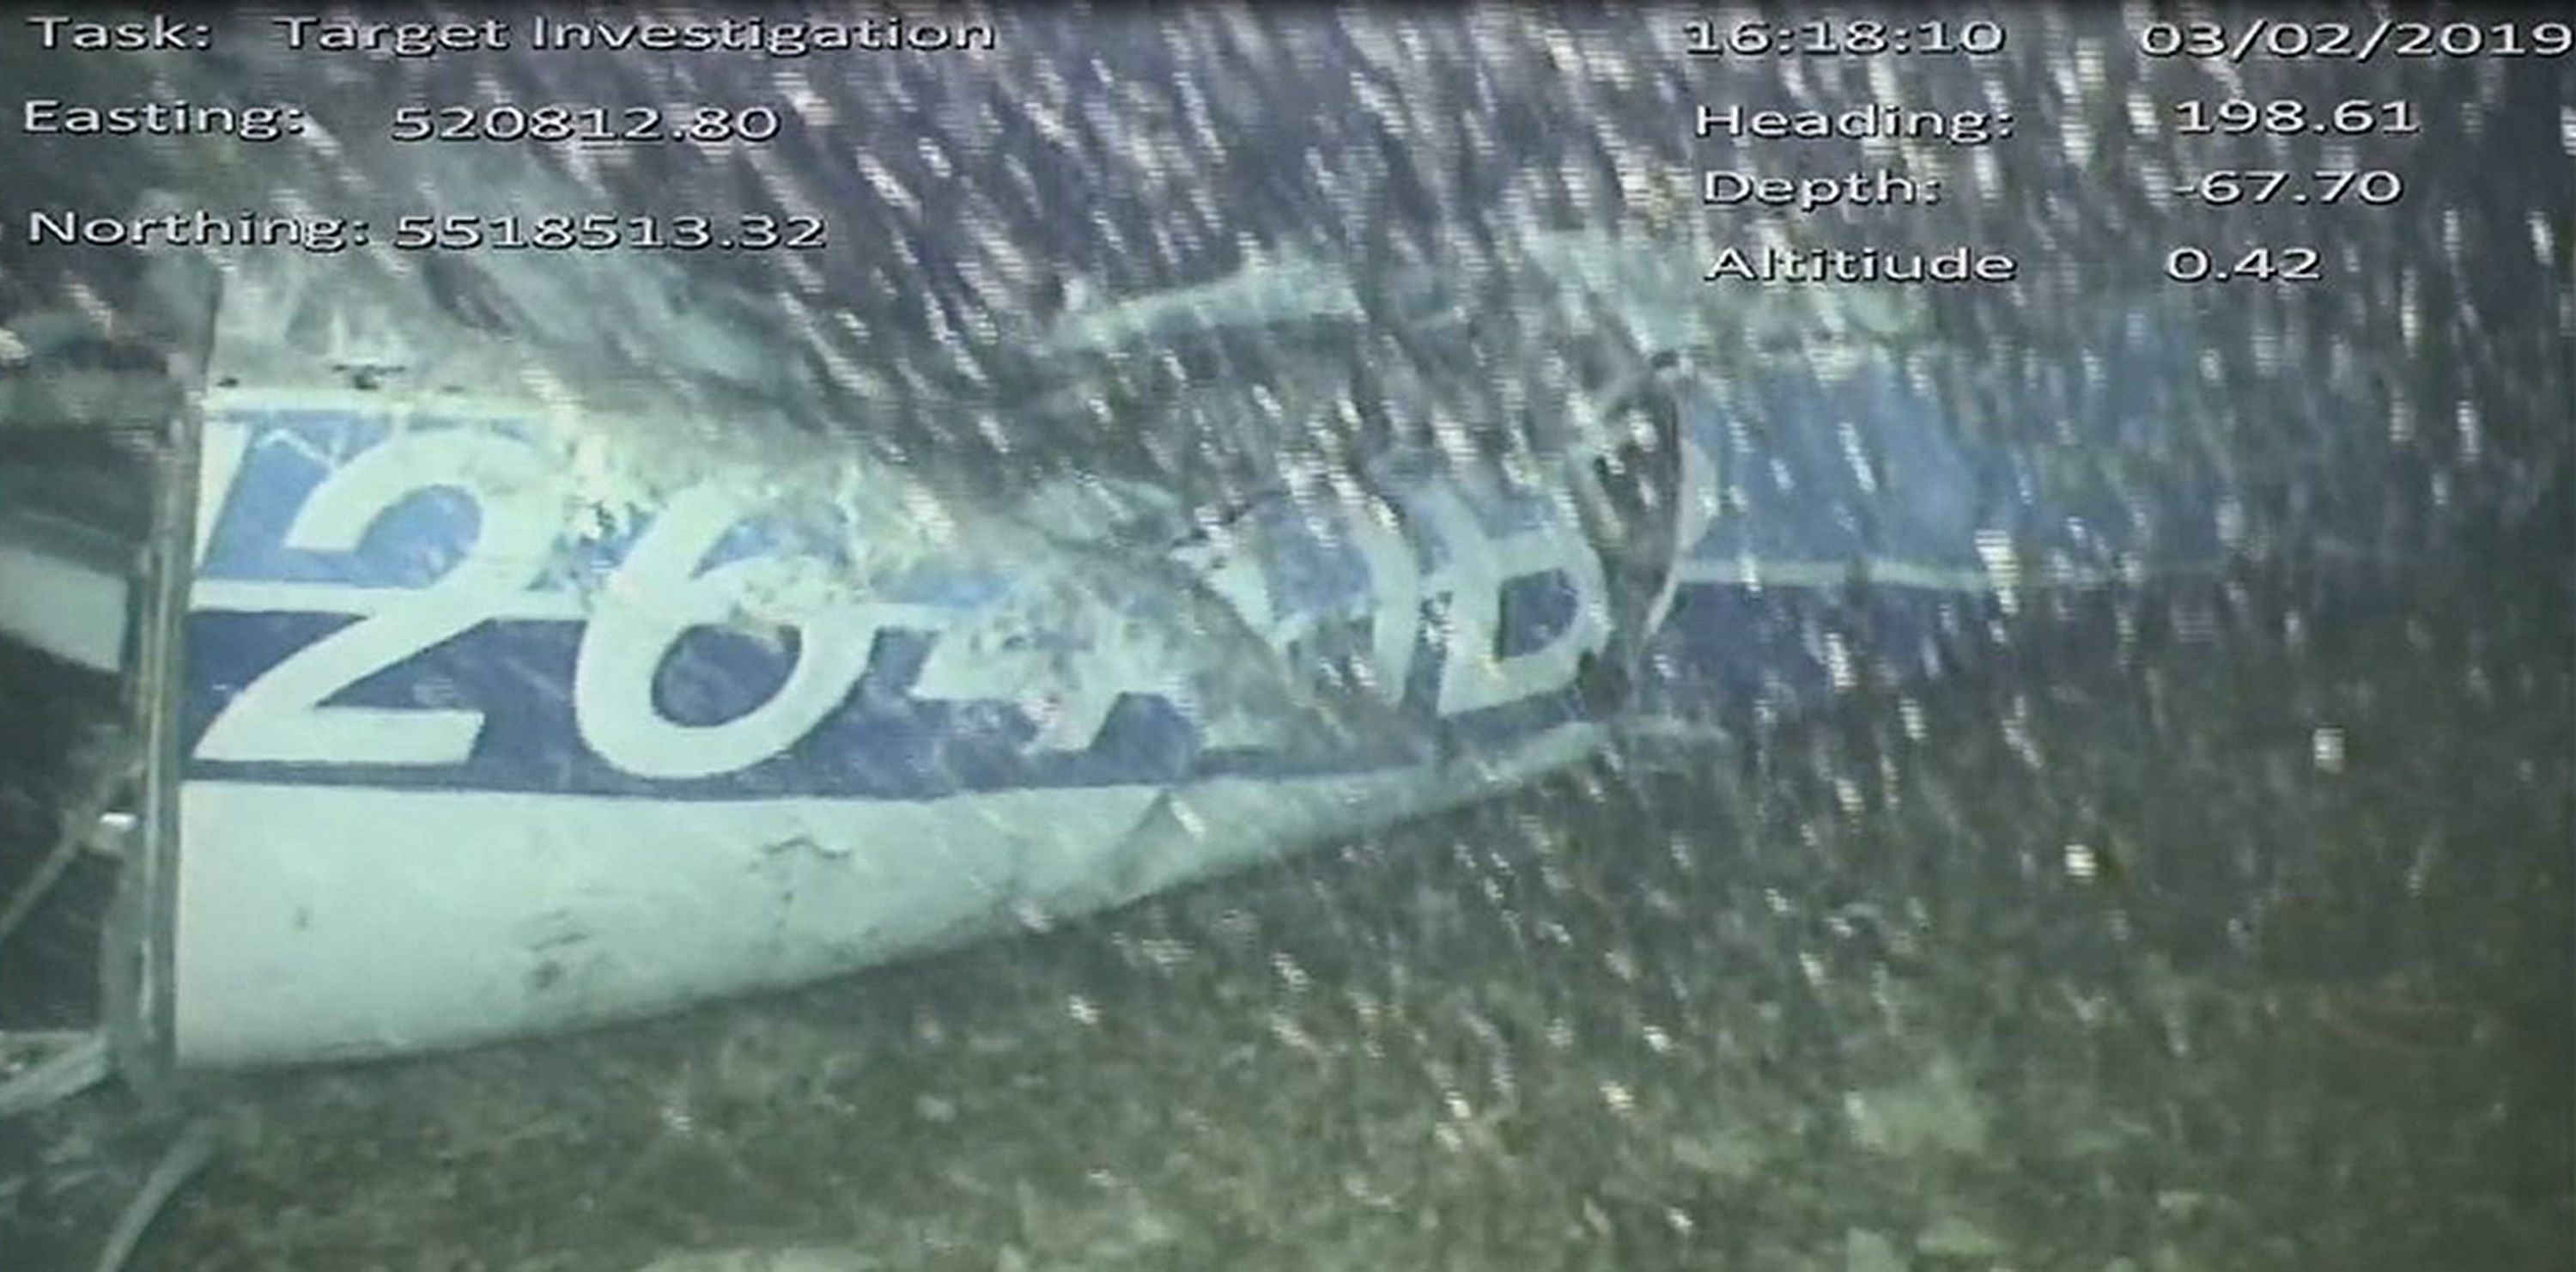 A handout video footage still image released by the UK Air Accidents Investigation Branch (AAIB) shows the rear left side of the fuselage, including part of the aircraft registration